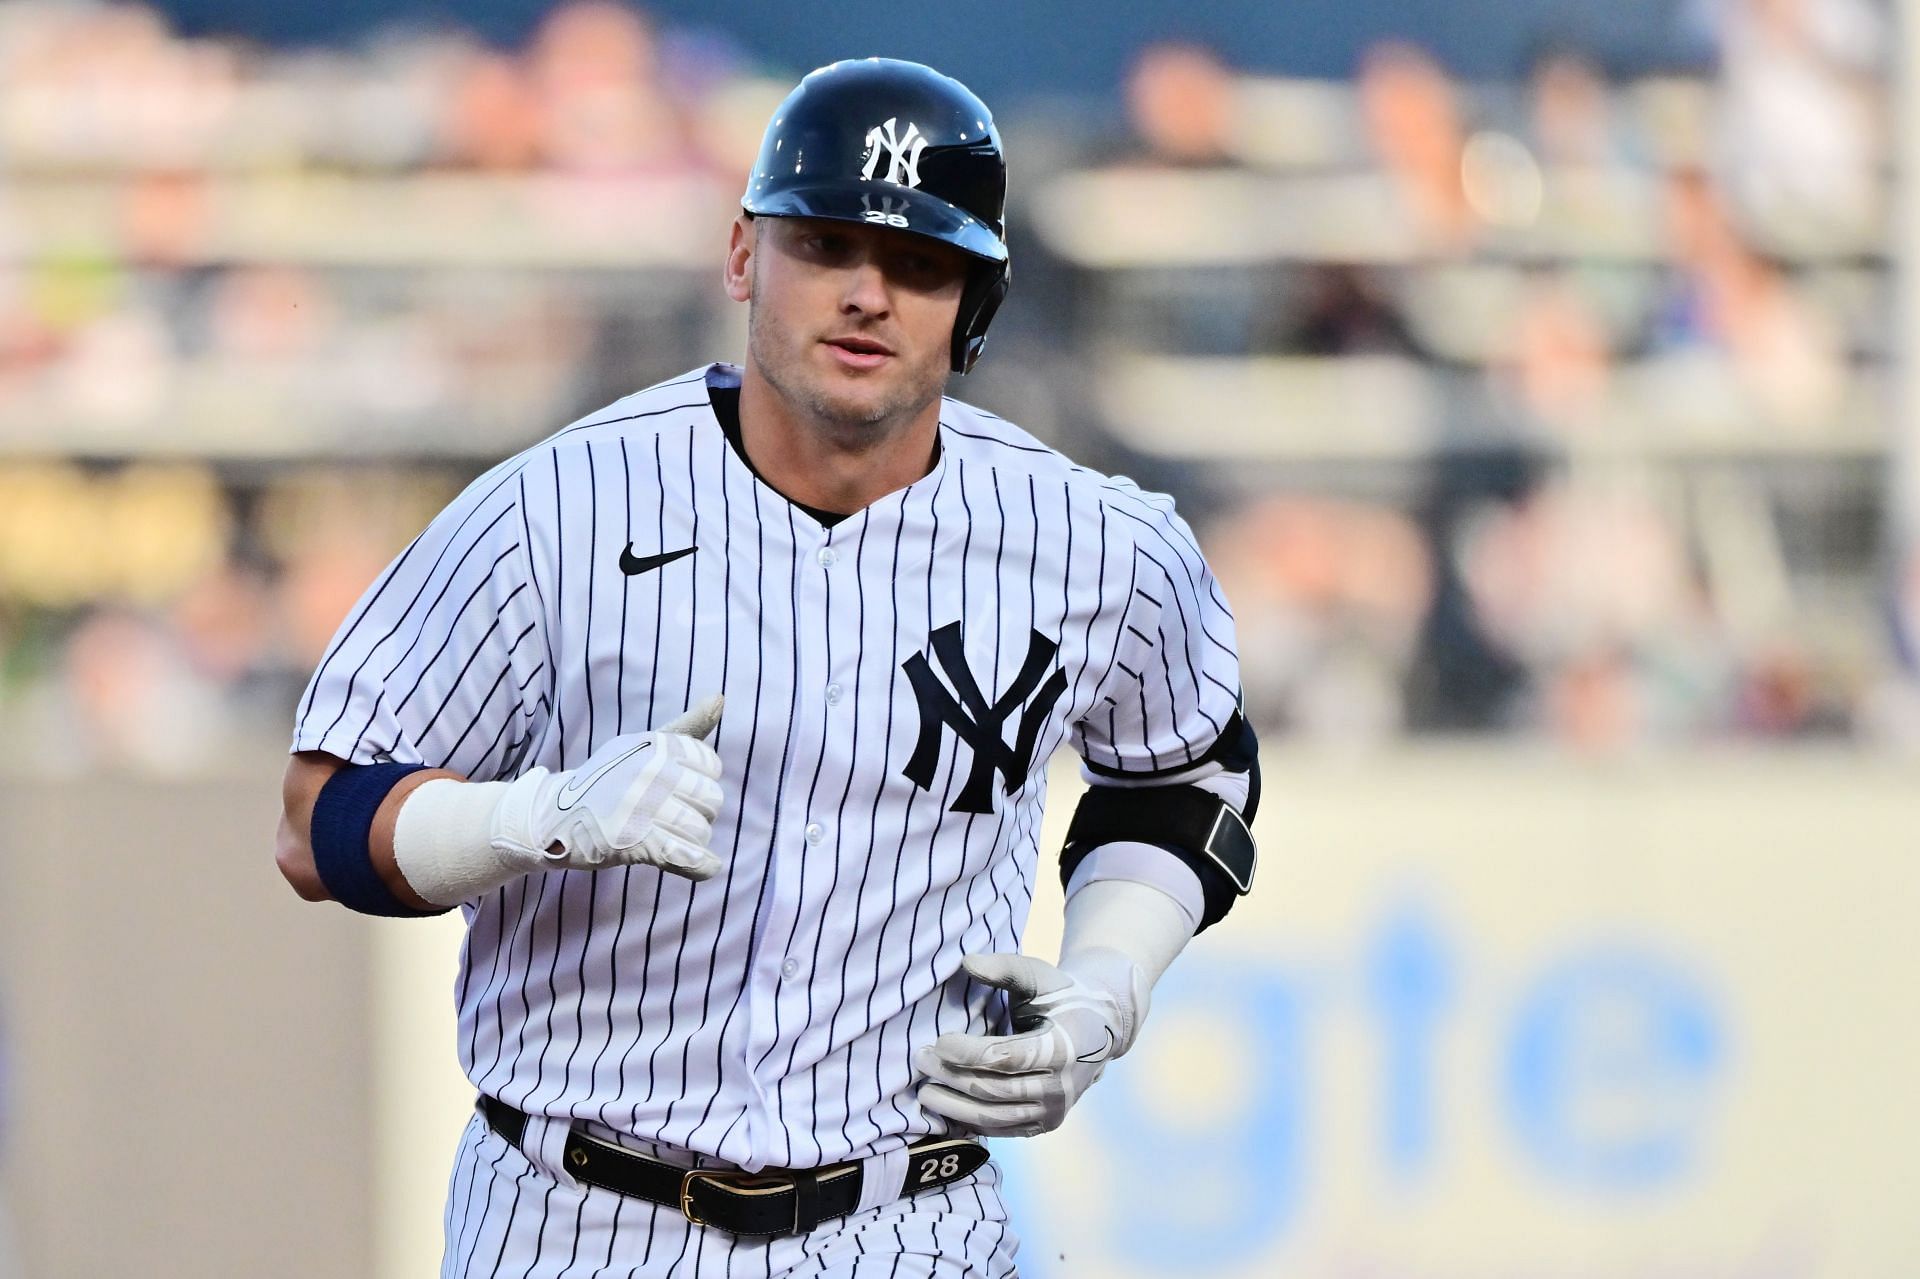 Yankees 3B Josh Donaldson confident about recapturing lost touch after  debut season struggles with the Bronx Bombers